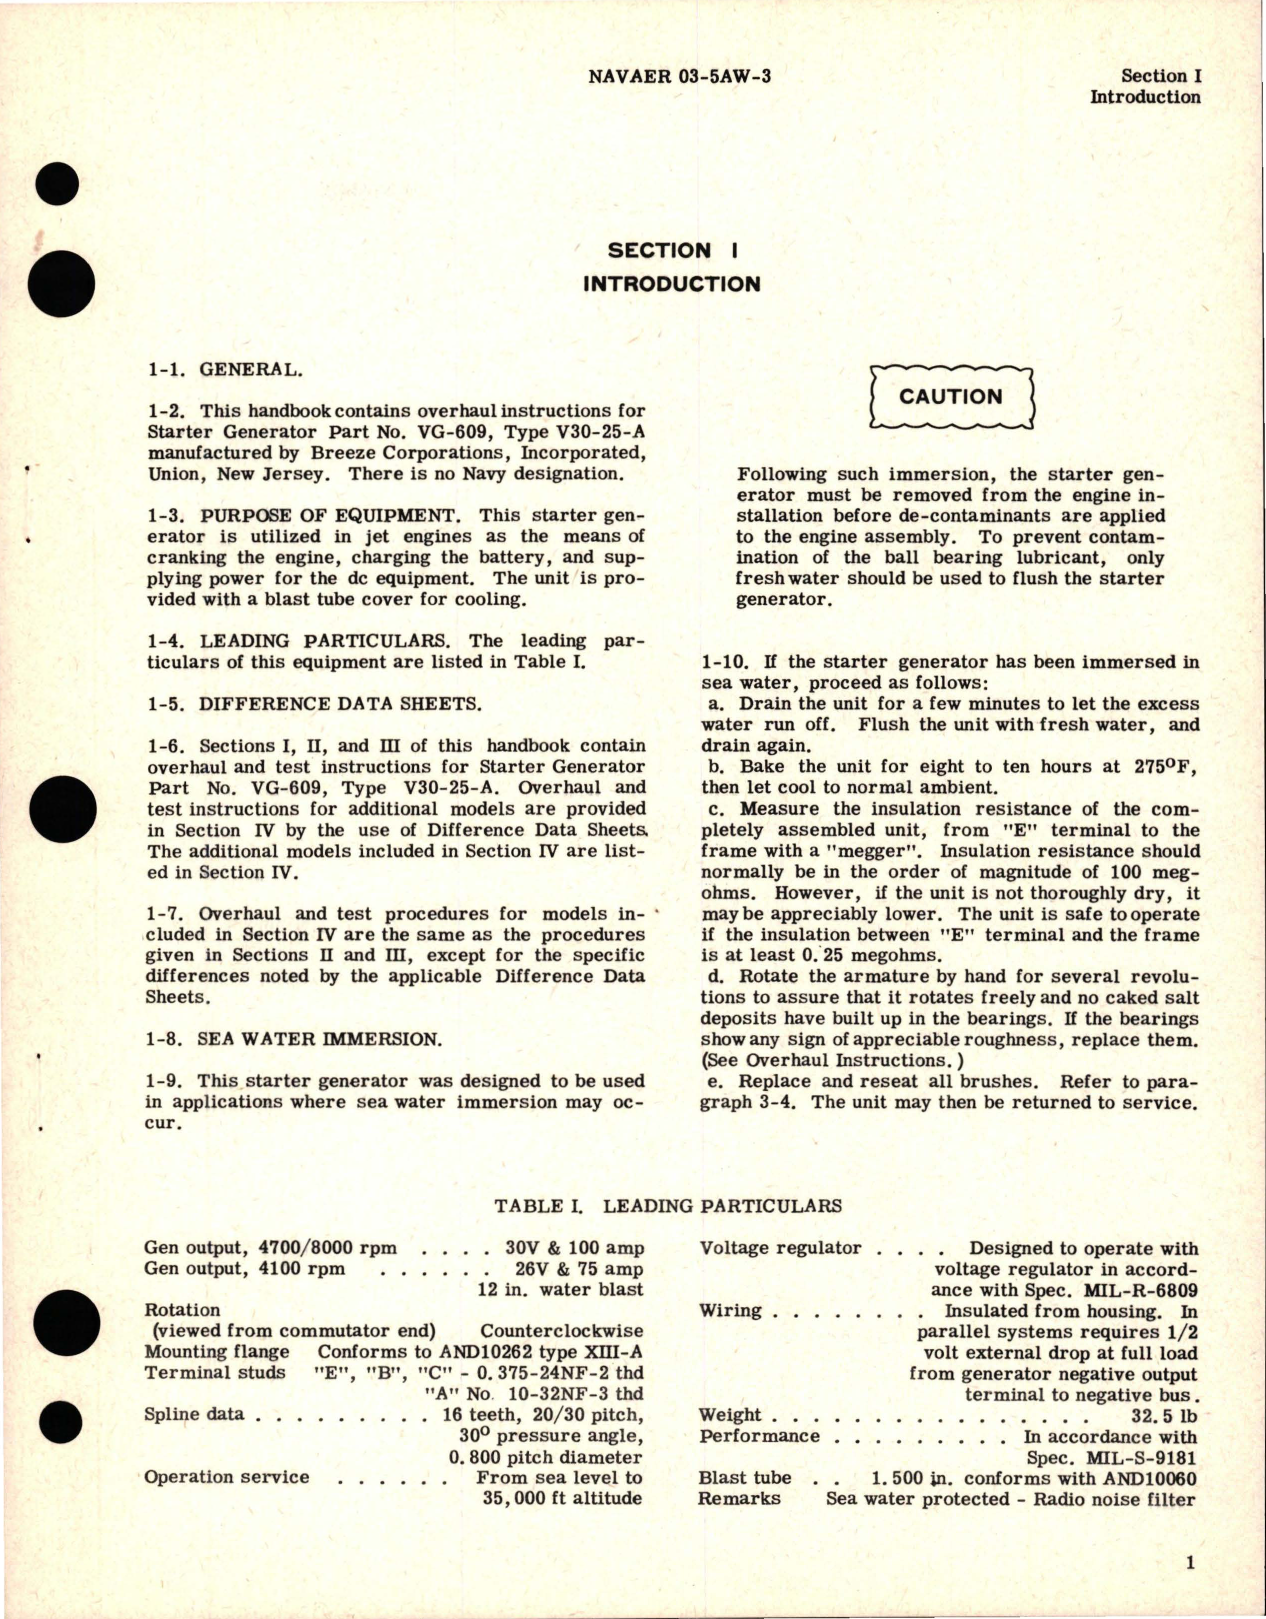 Sample page 5 from AirCorps Library document: Overhaul Instructions for Starter Generator - Parts VG-609, VG-609-11 - Types V30-25-A, V30-25-C